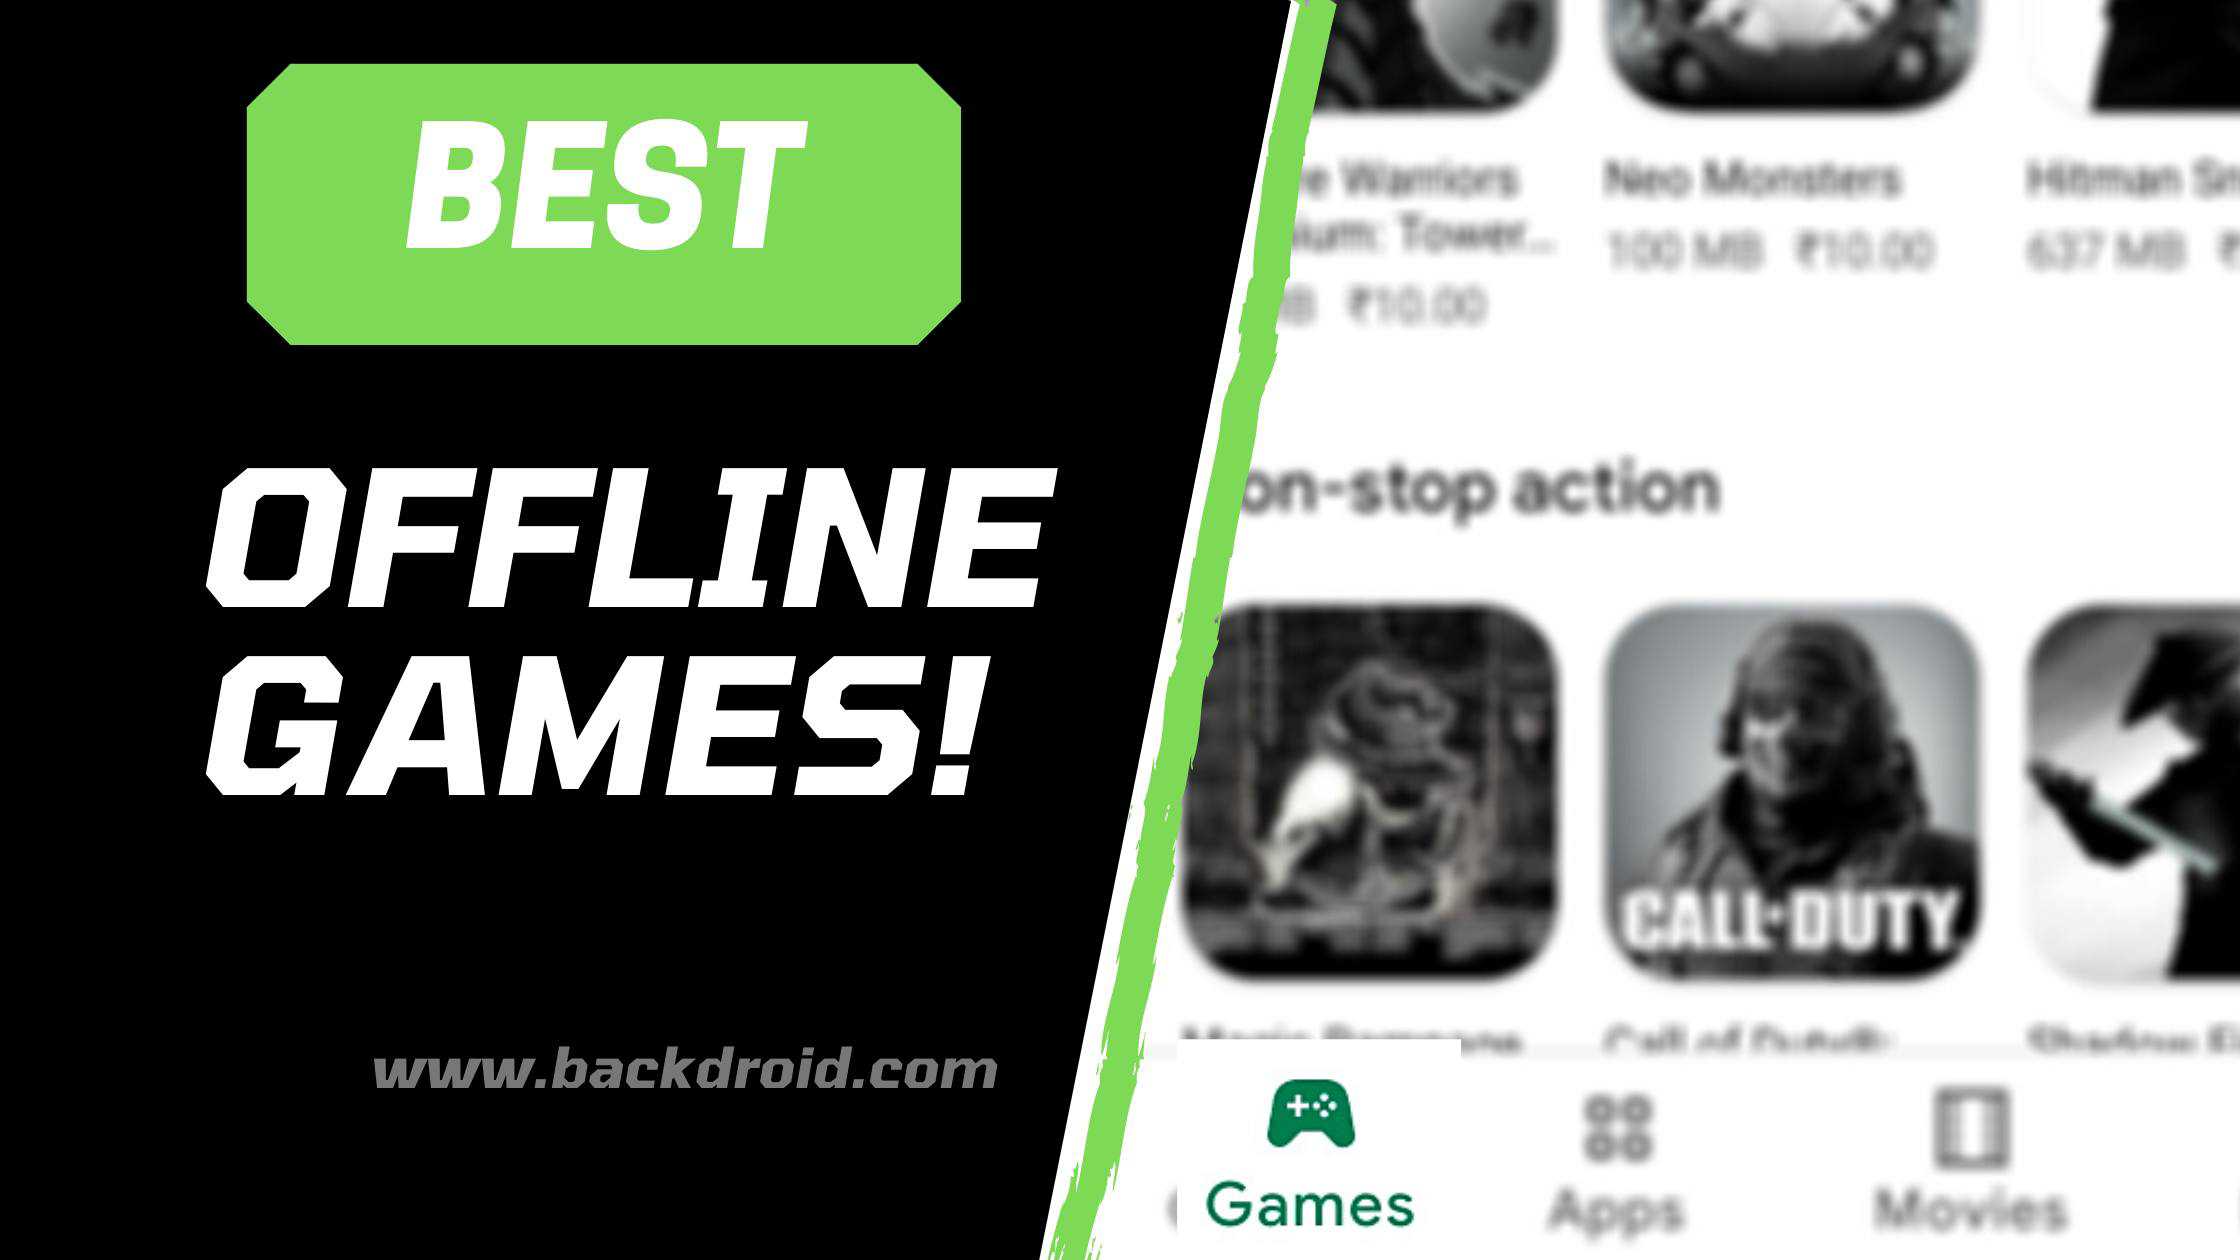 5 best offline games for android